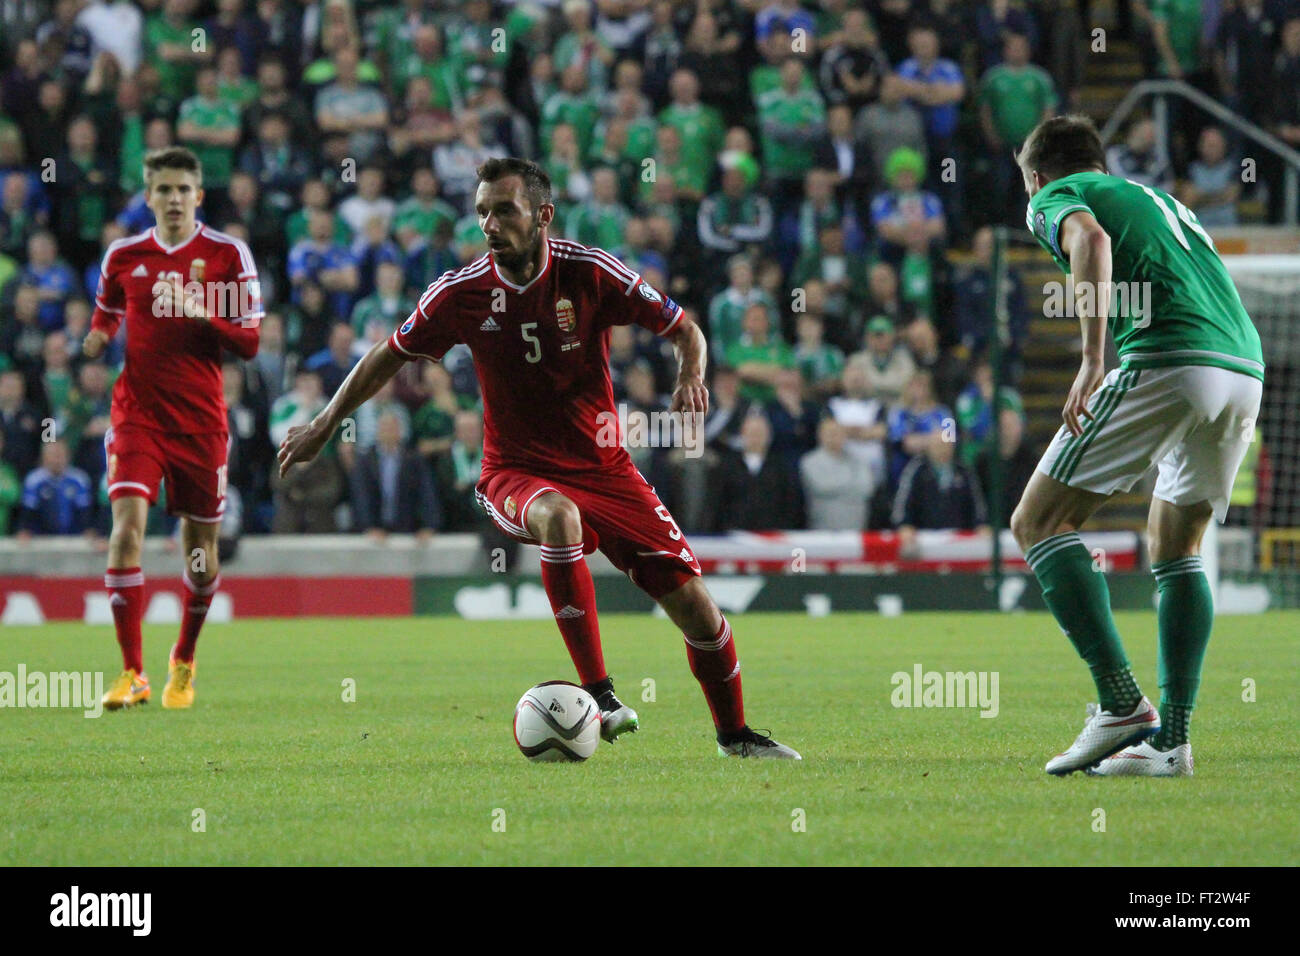 07 Sept 2015 - Euro 2016 Qualifier - Group F - Northern Ireland 1 Hungary 1. Hungary's Attila Fiola (5) in action during the game. Stock Photo